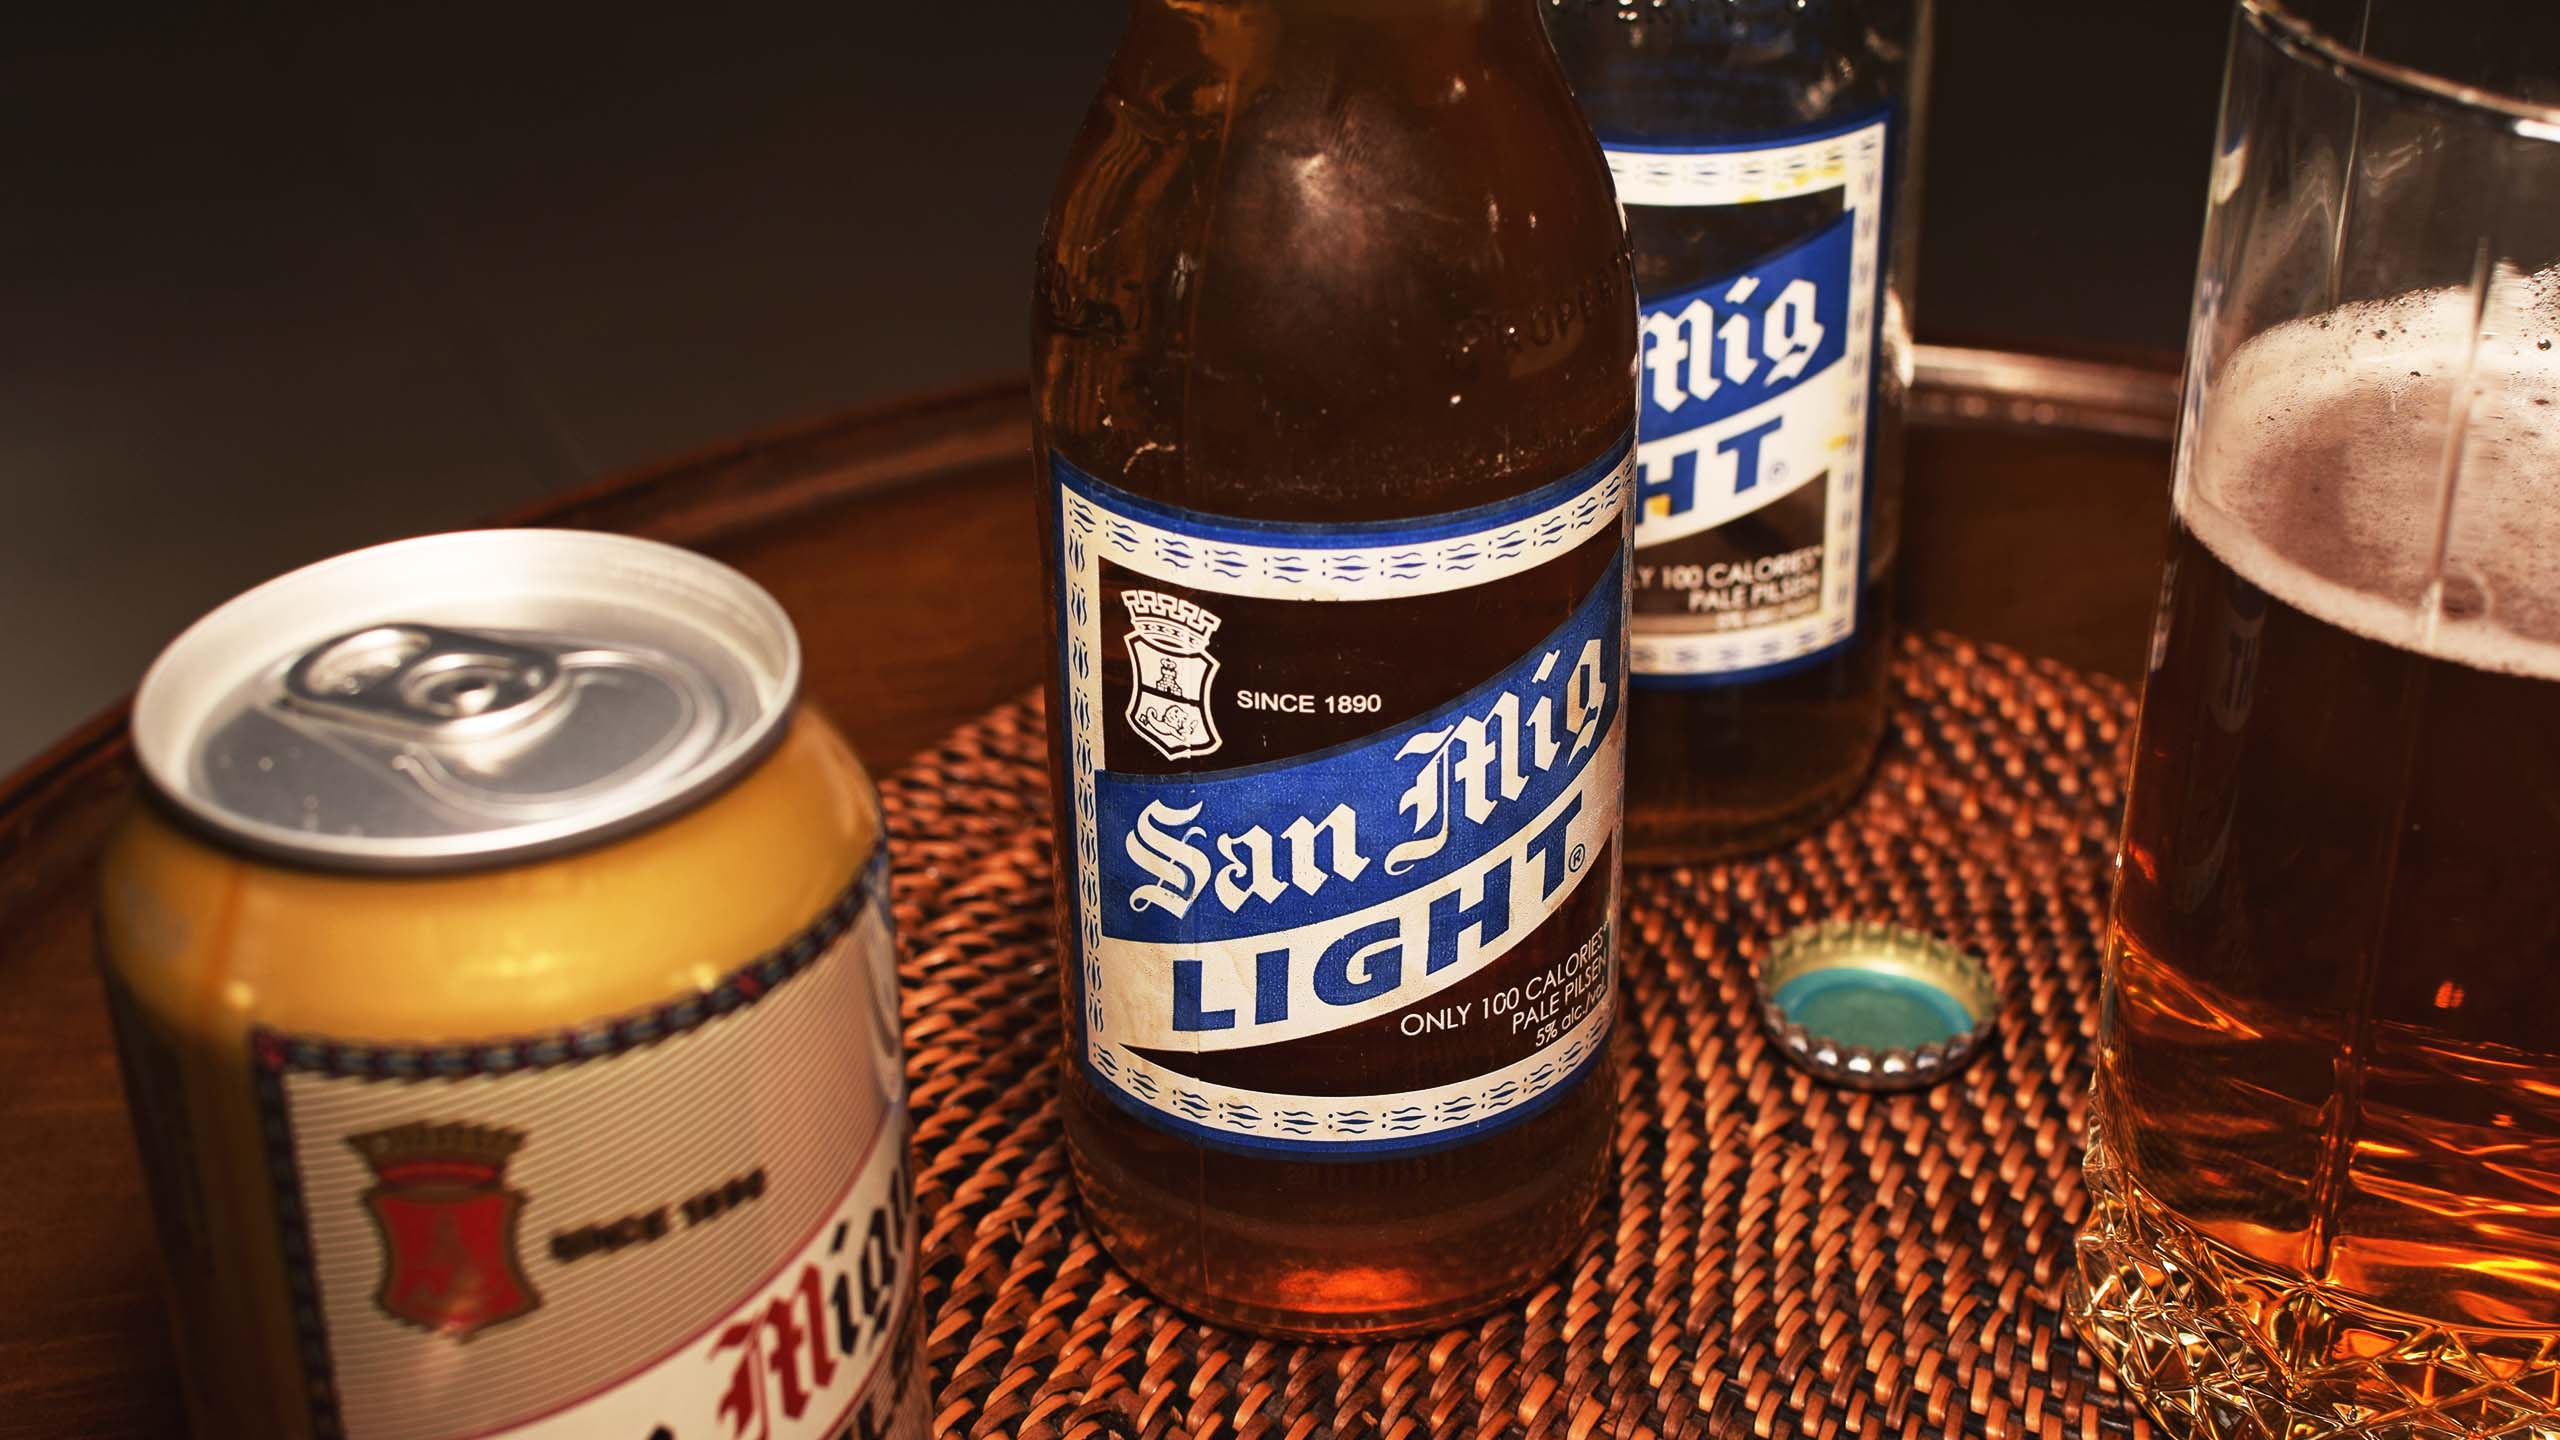 A styled photo of bottles of San Miguel Light, a can of Pale Pilsen, and a glass of beer